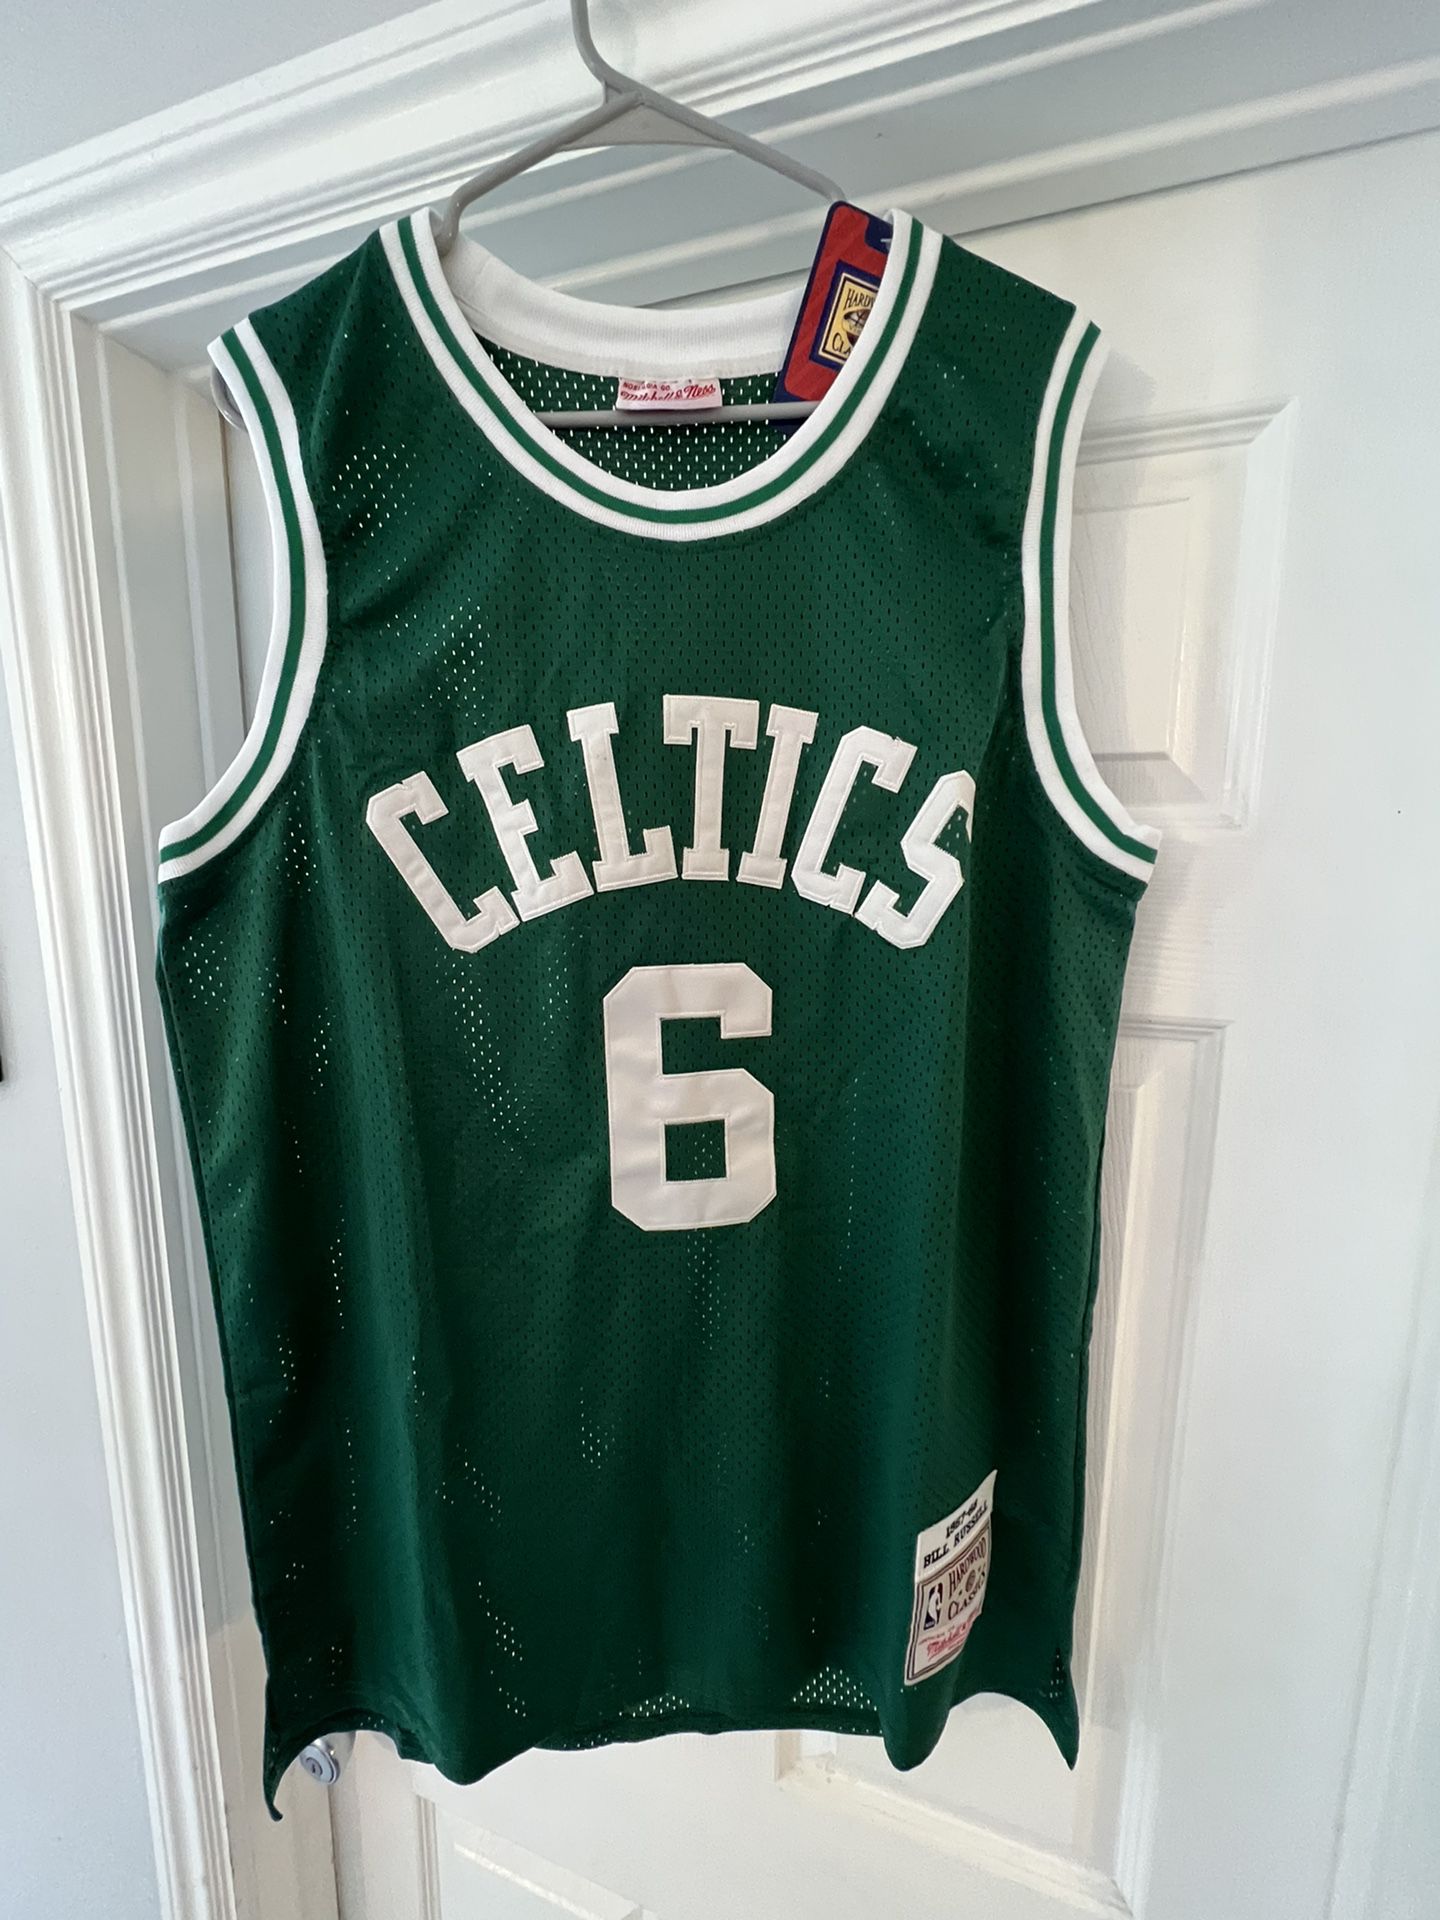 Celtics Jersey Bill Russell New Size Large Only for Sale in Pico